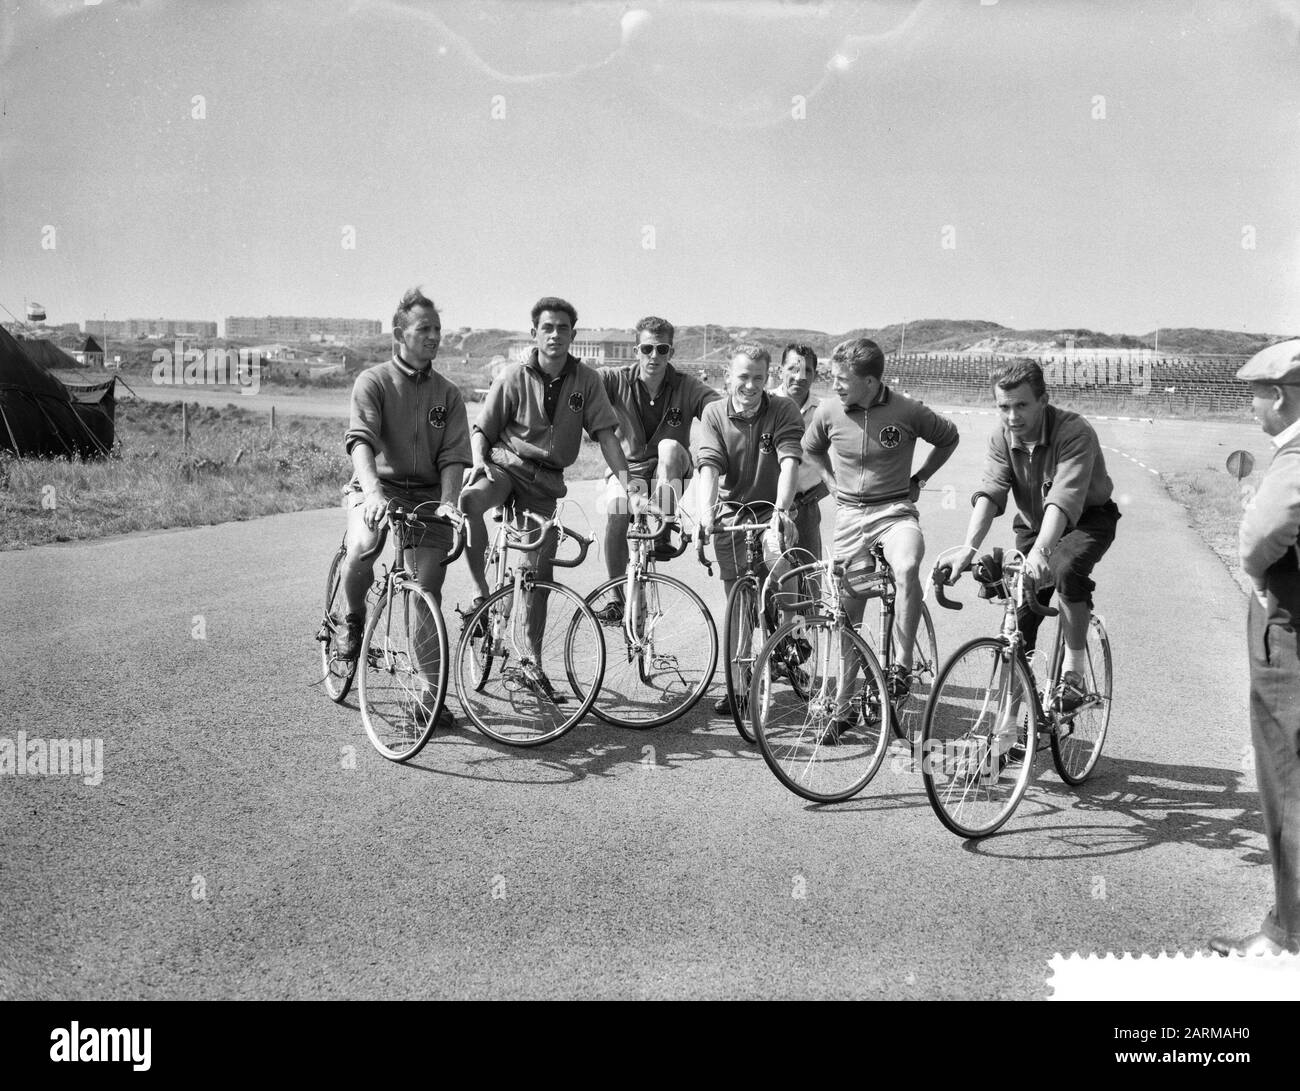 Training of the amateurs on the road in Zandvoort Date: August 13, 1959 Location: Noord-Holland, Zandvoort Keywords: sport, cycling Stock Photo